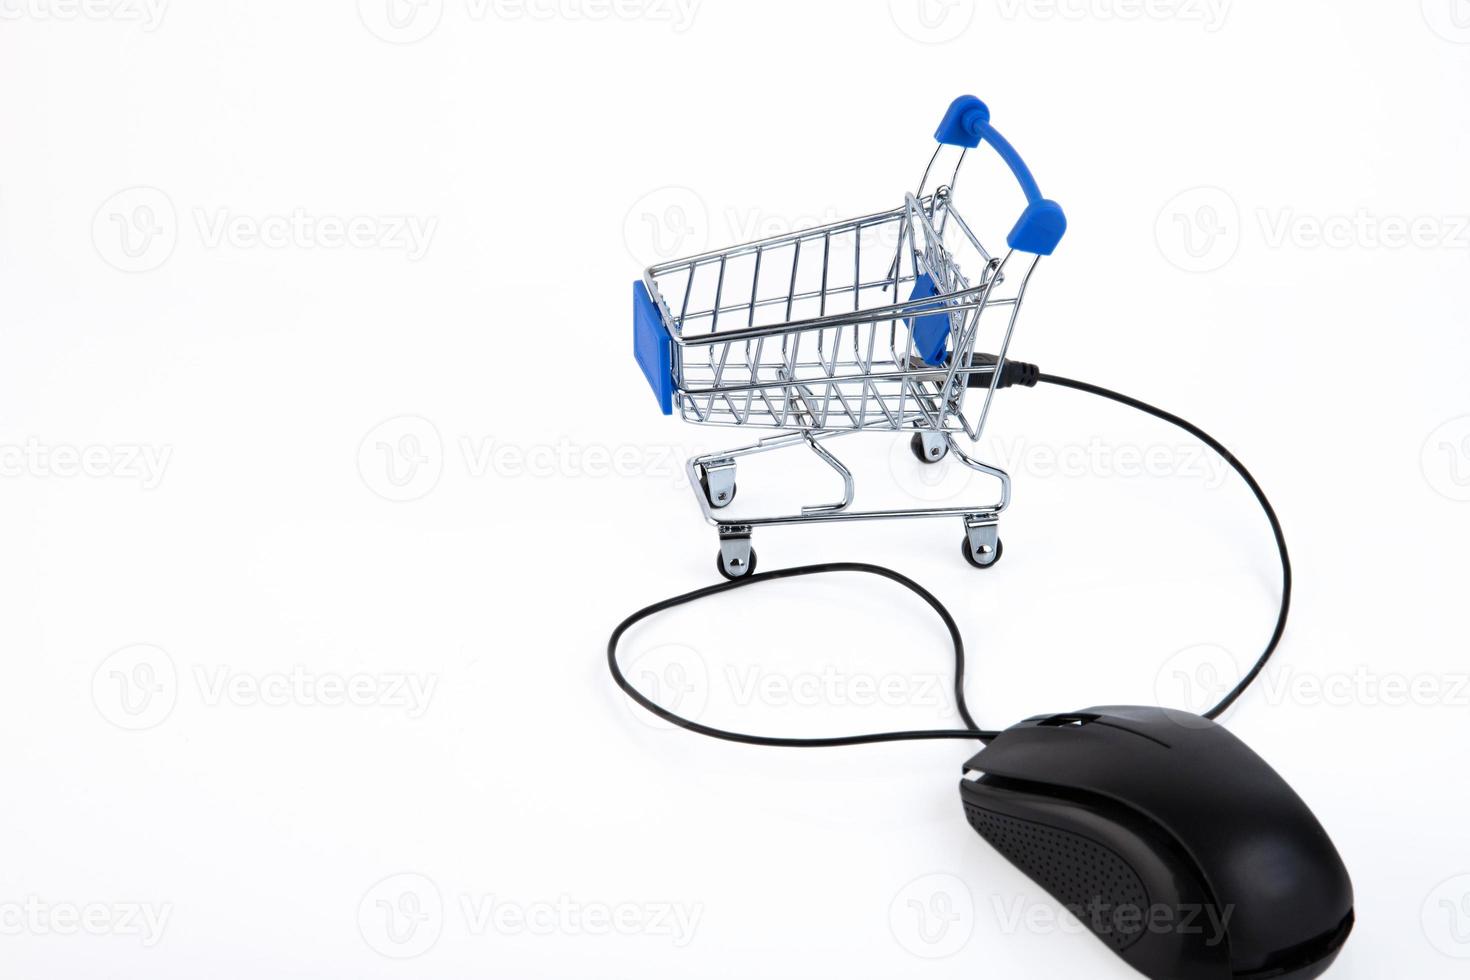 PC mouse, shopping cart, supermarket trolley, e-commerce, digital commerce, retail on a white background. Copy space. photo